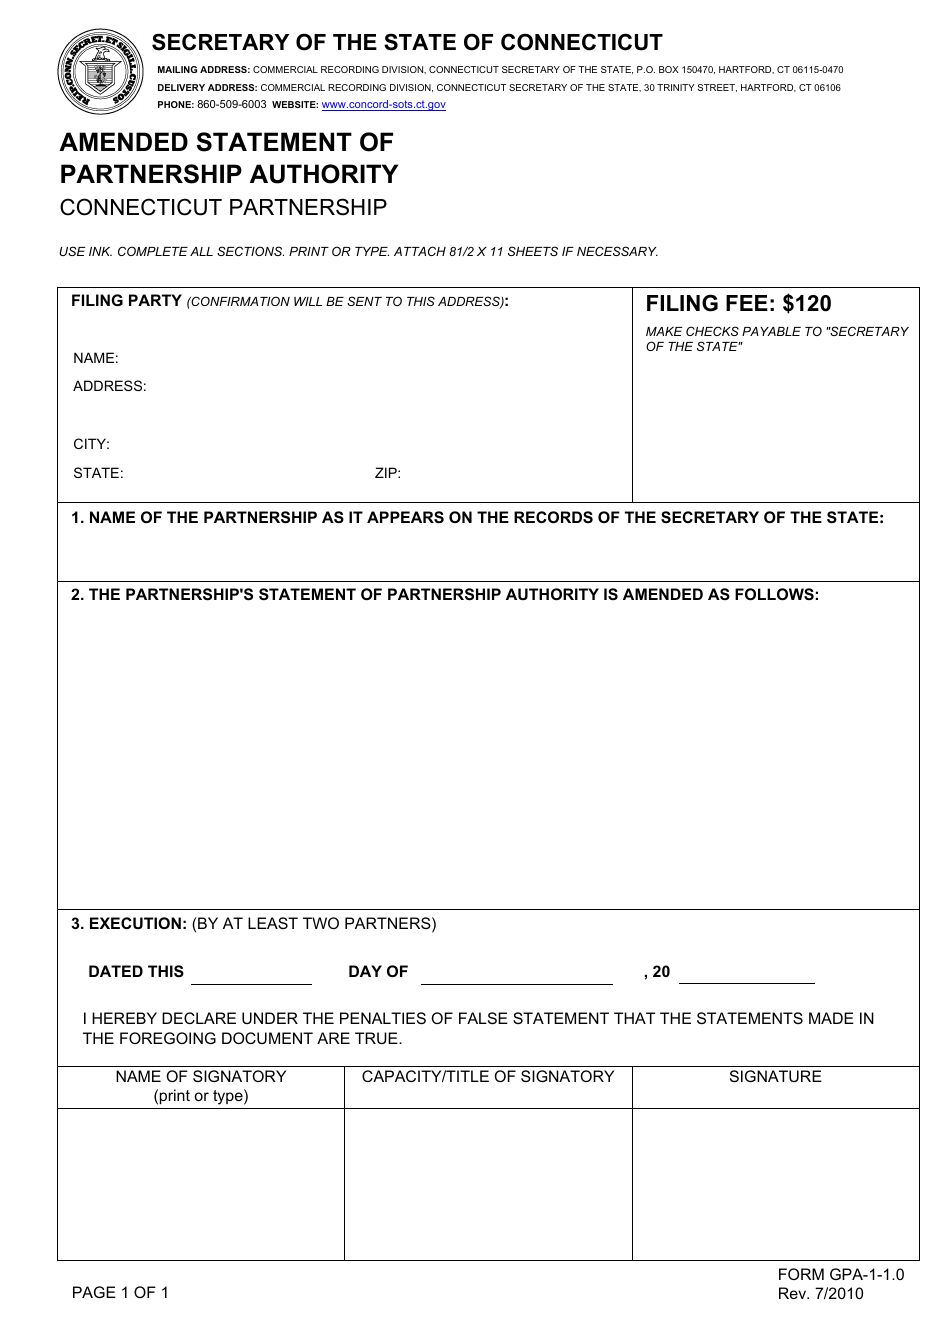 Form GPA-1-1.0 Amended Statement of Partnership Authority - Connecticut Partnership - Connecticut, Page 1